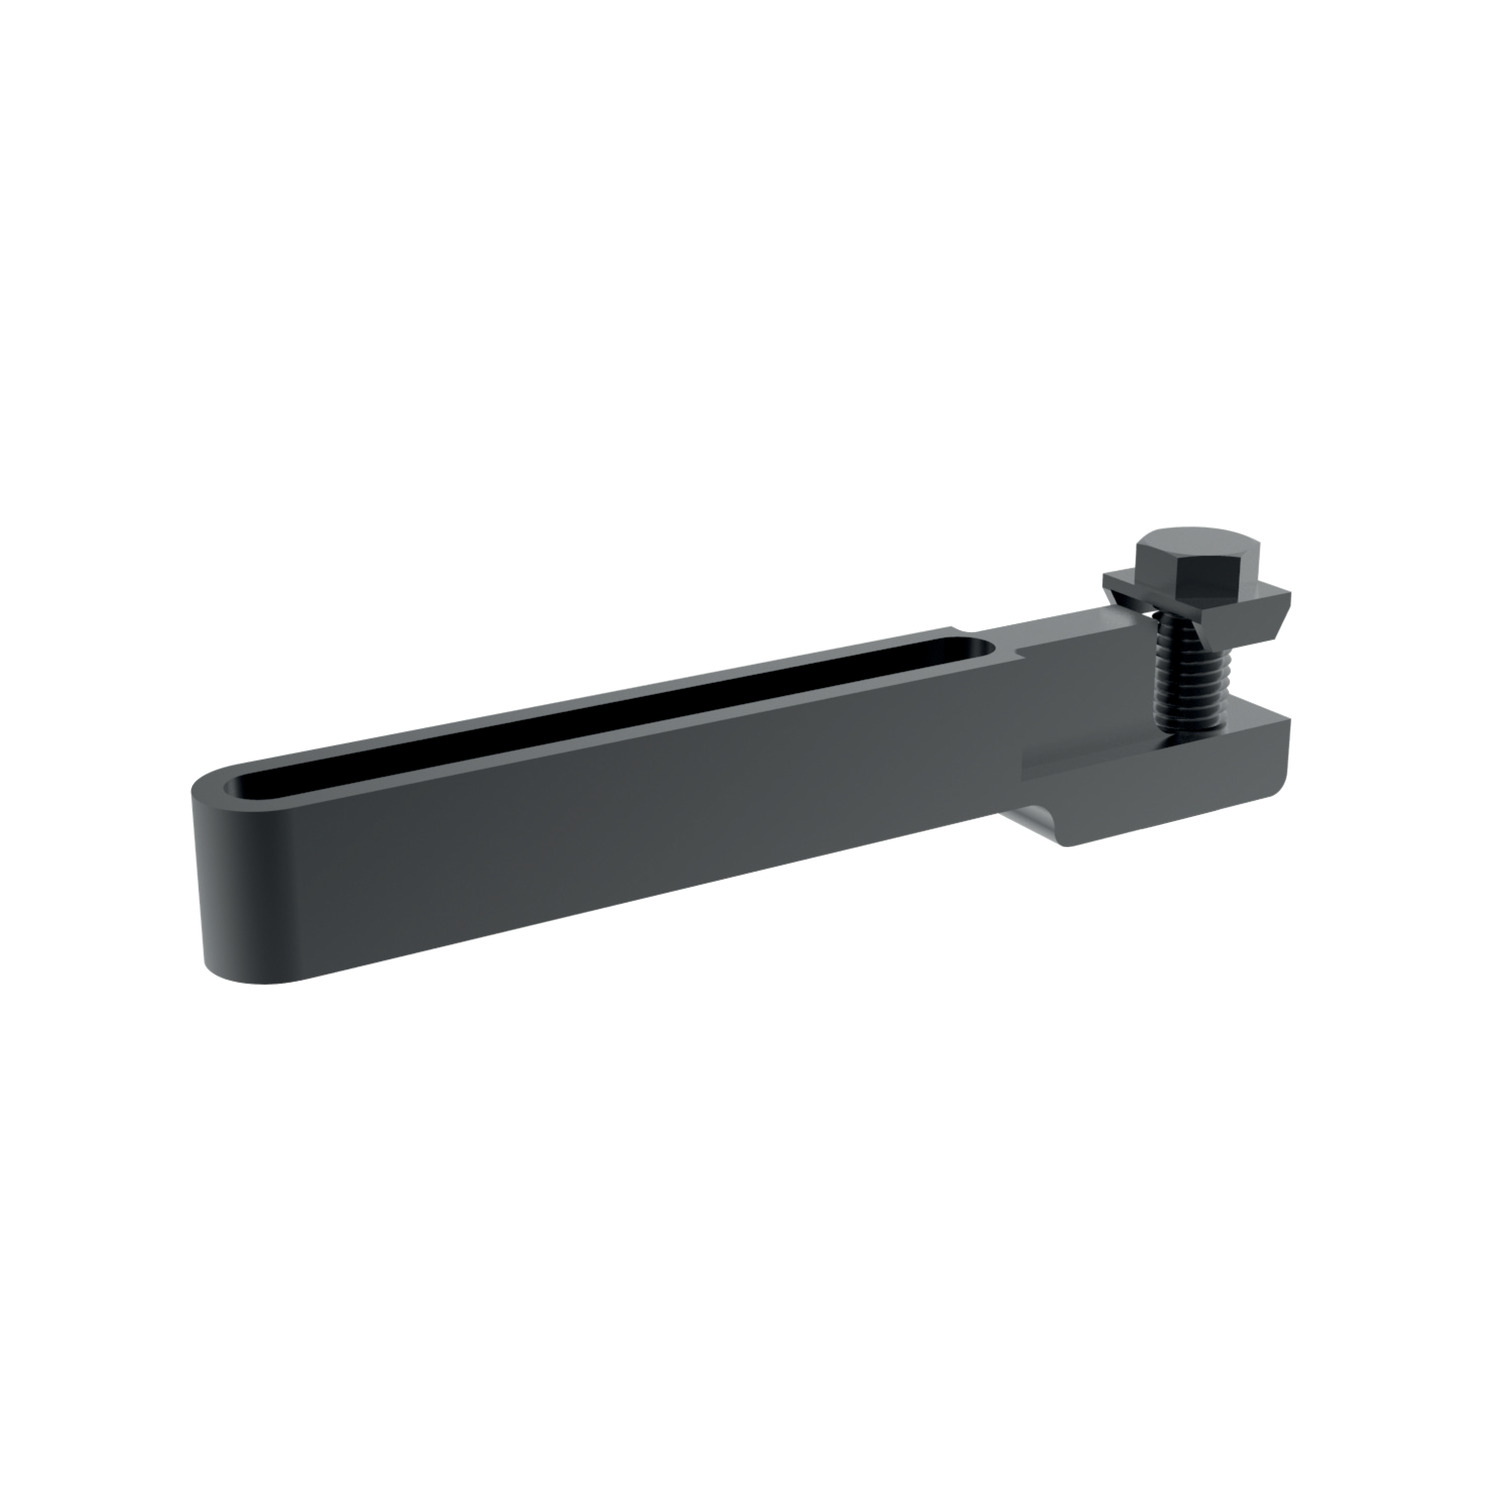 Product 45010, Clamping Arm Extension for manual toggle clamps / 